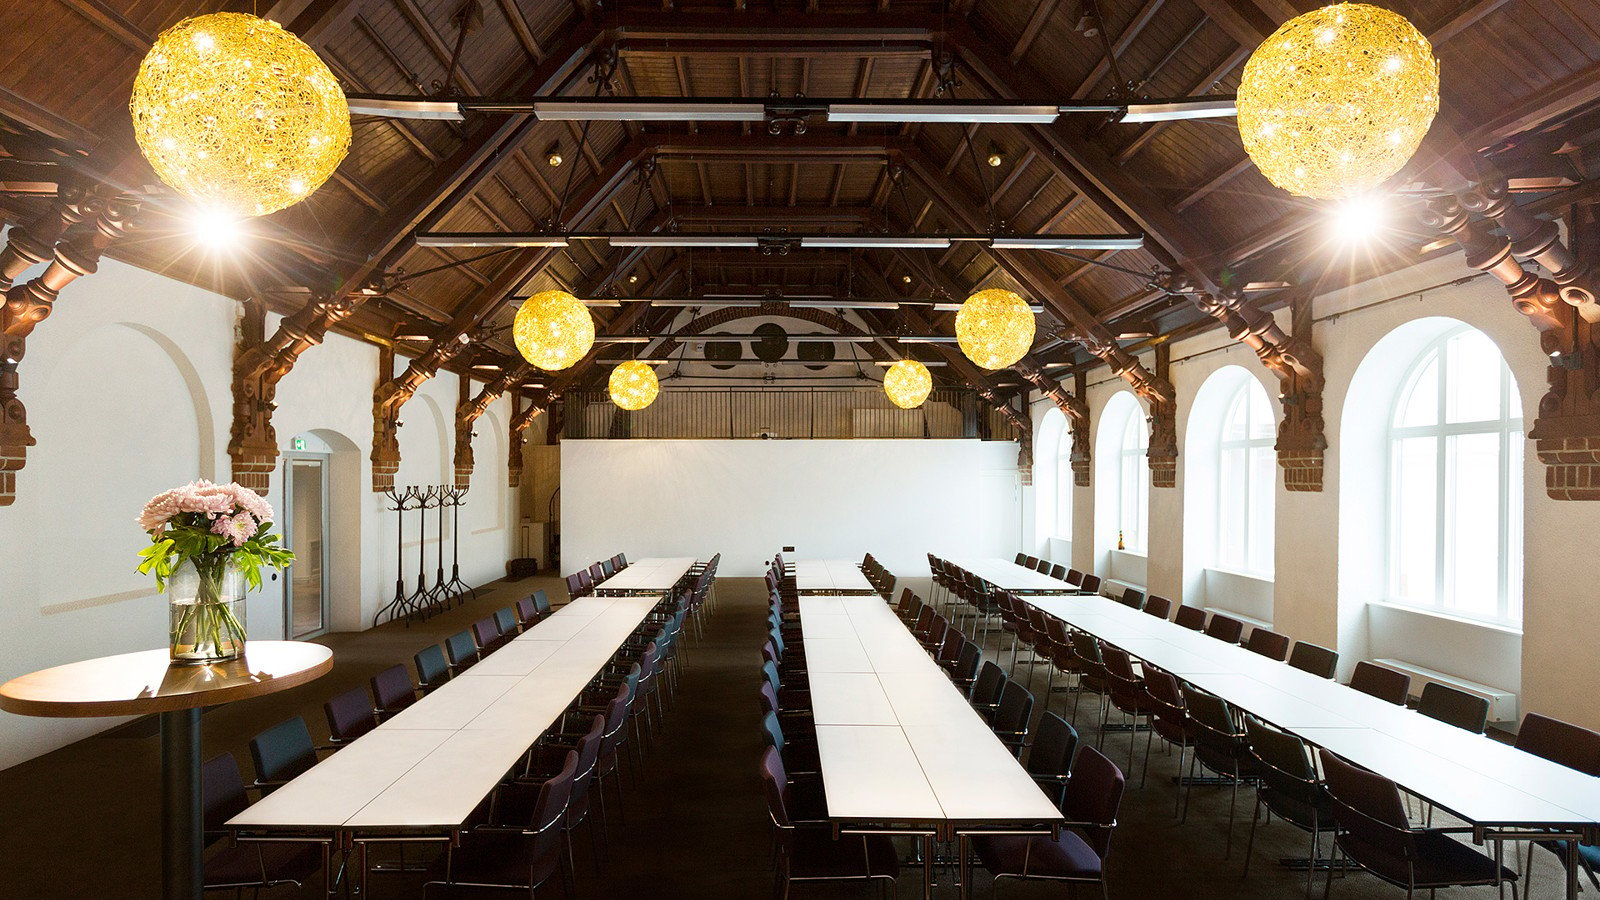 Large room with long white tables, dark chairs and high ceiling